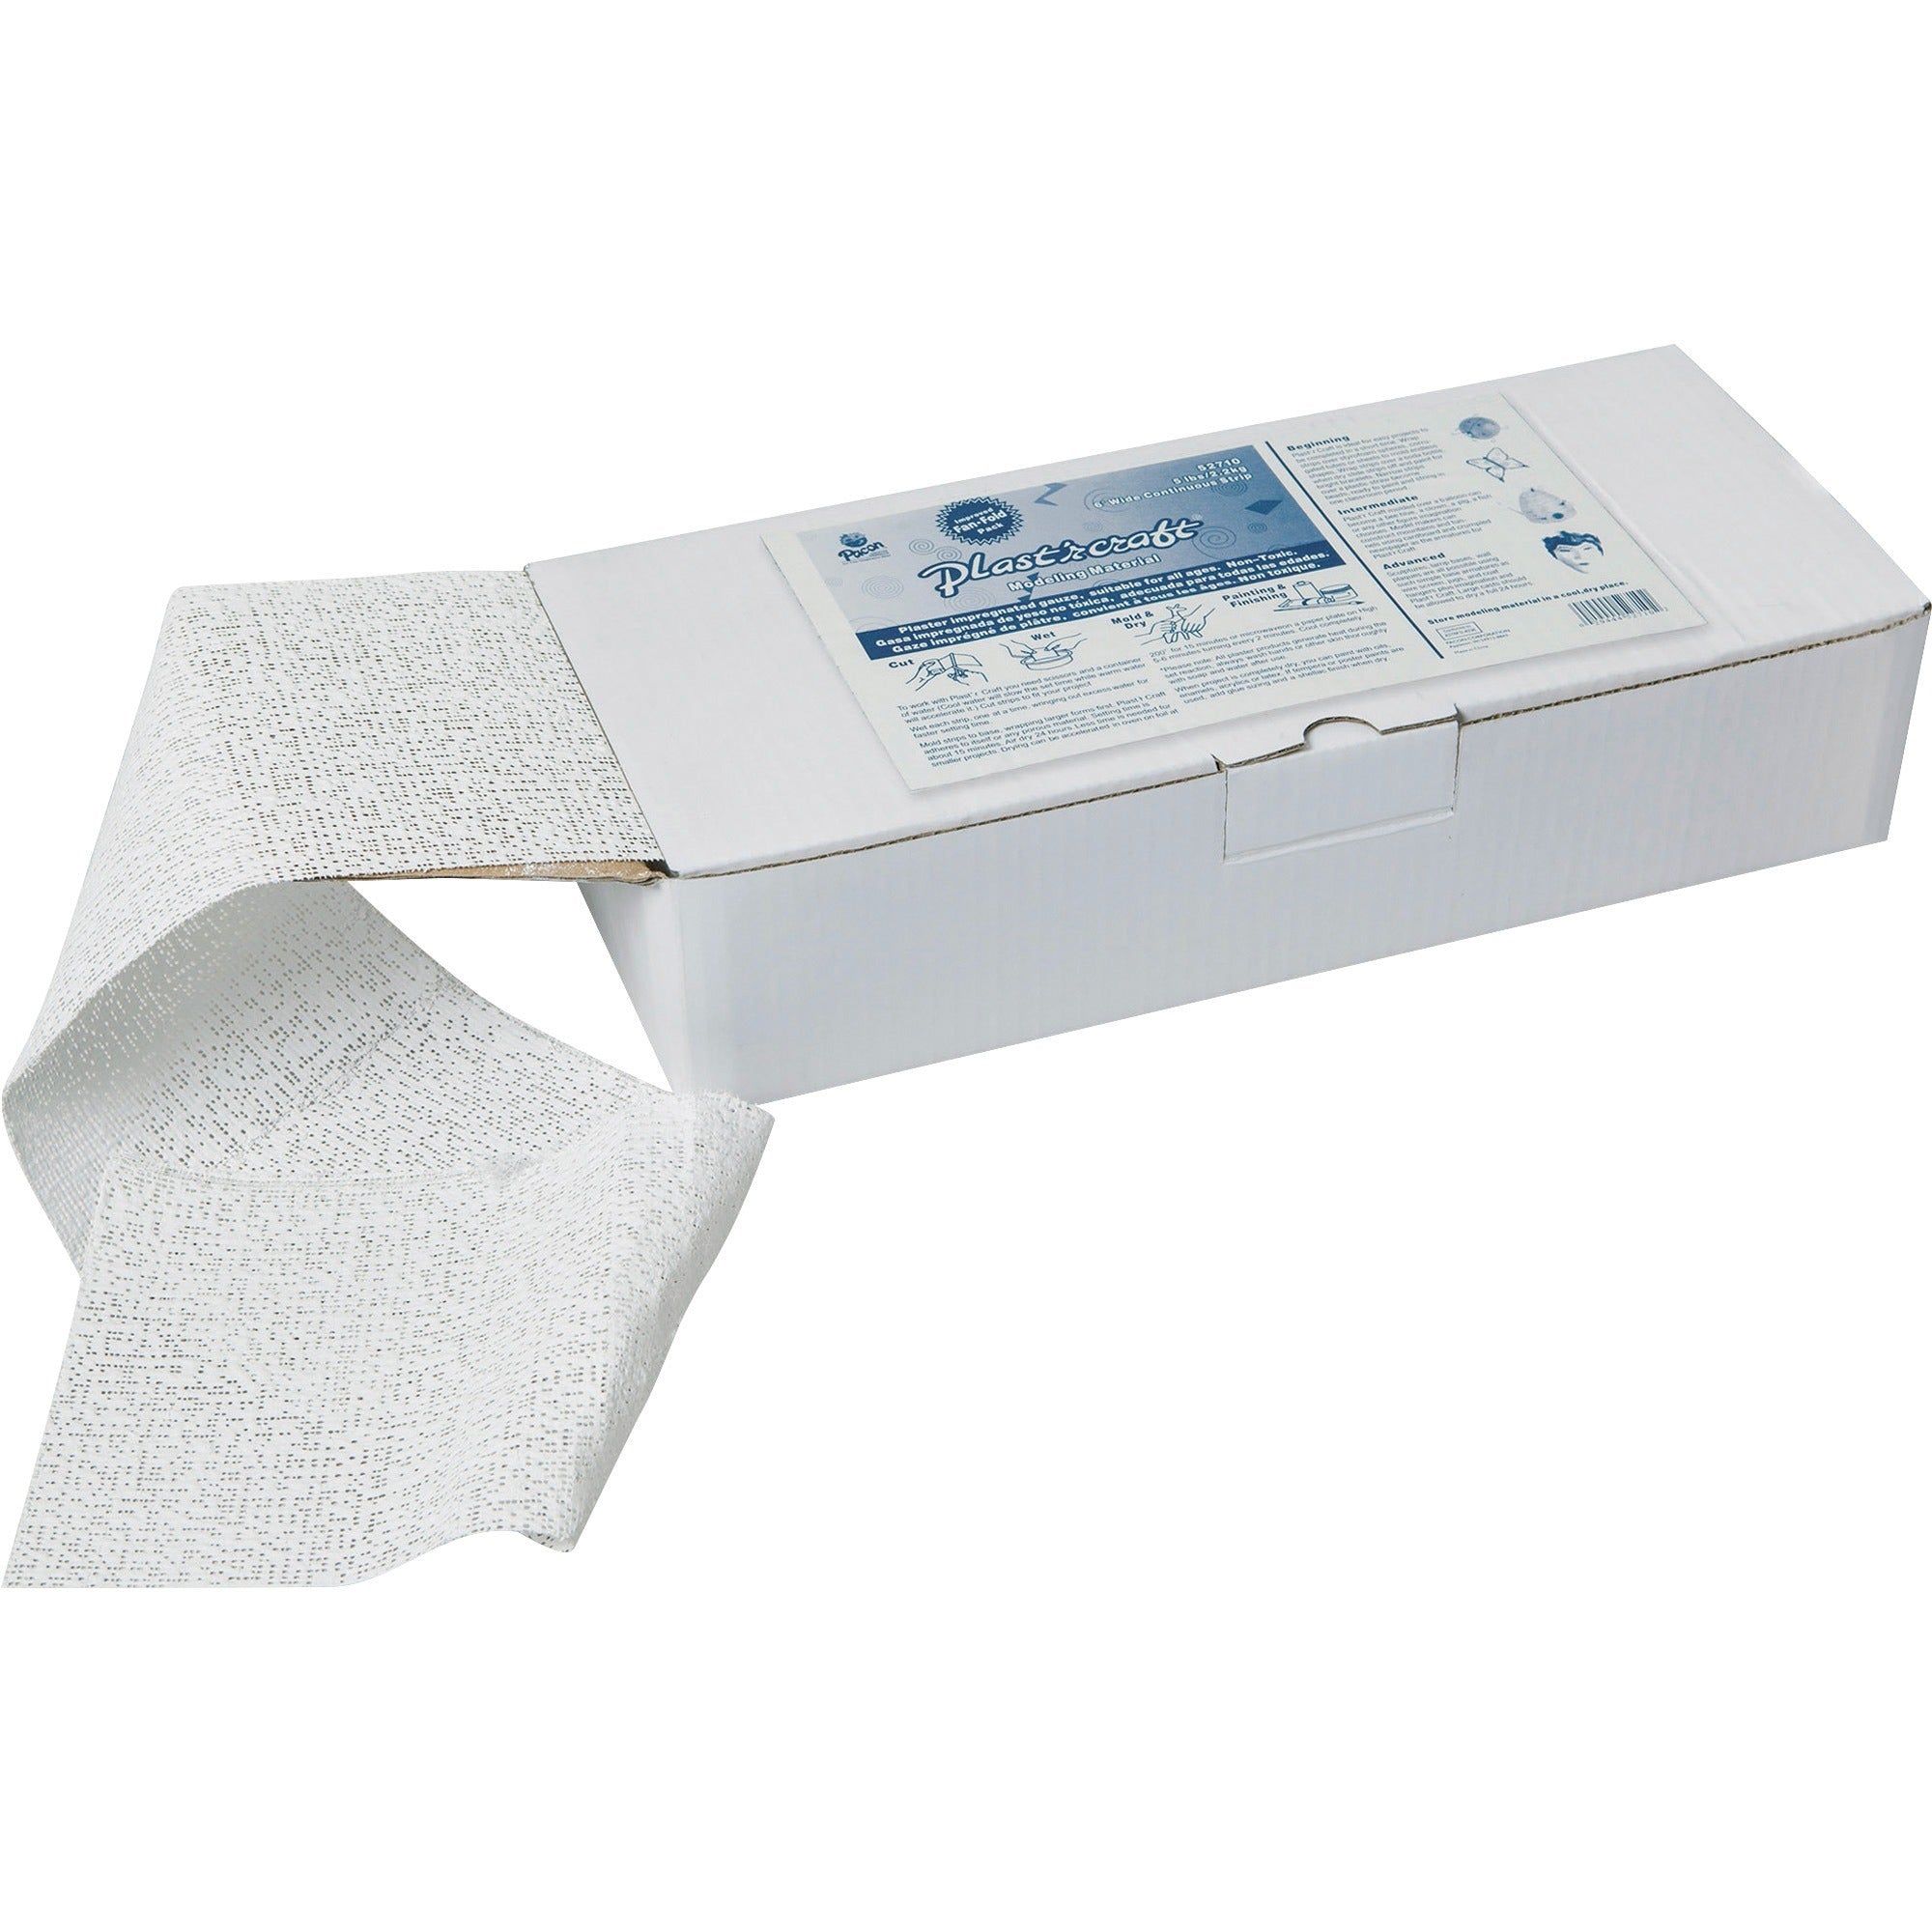 pacon-plaster-craft-gauze-3height-x-6width-1-each-white_pac52710 - 1